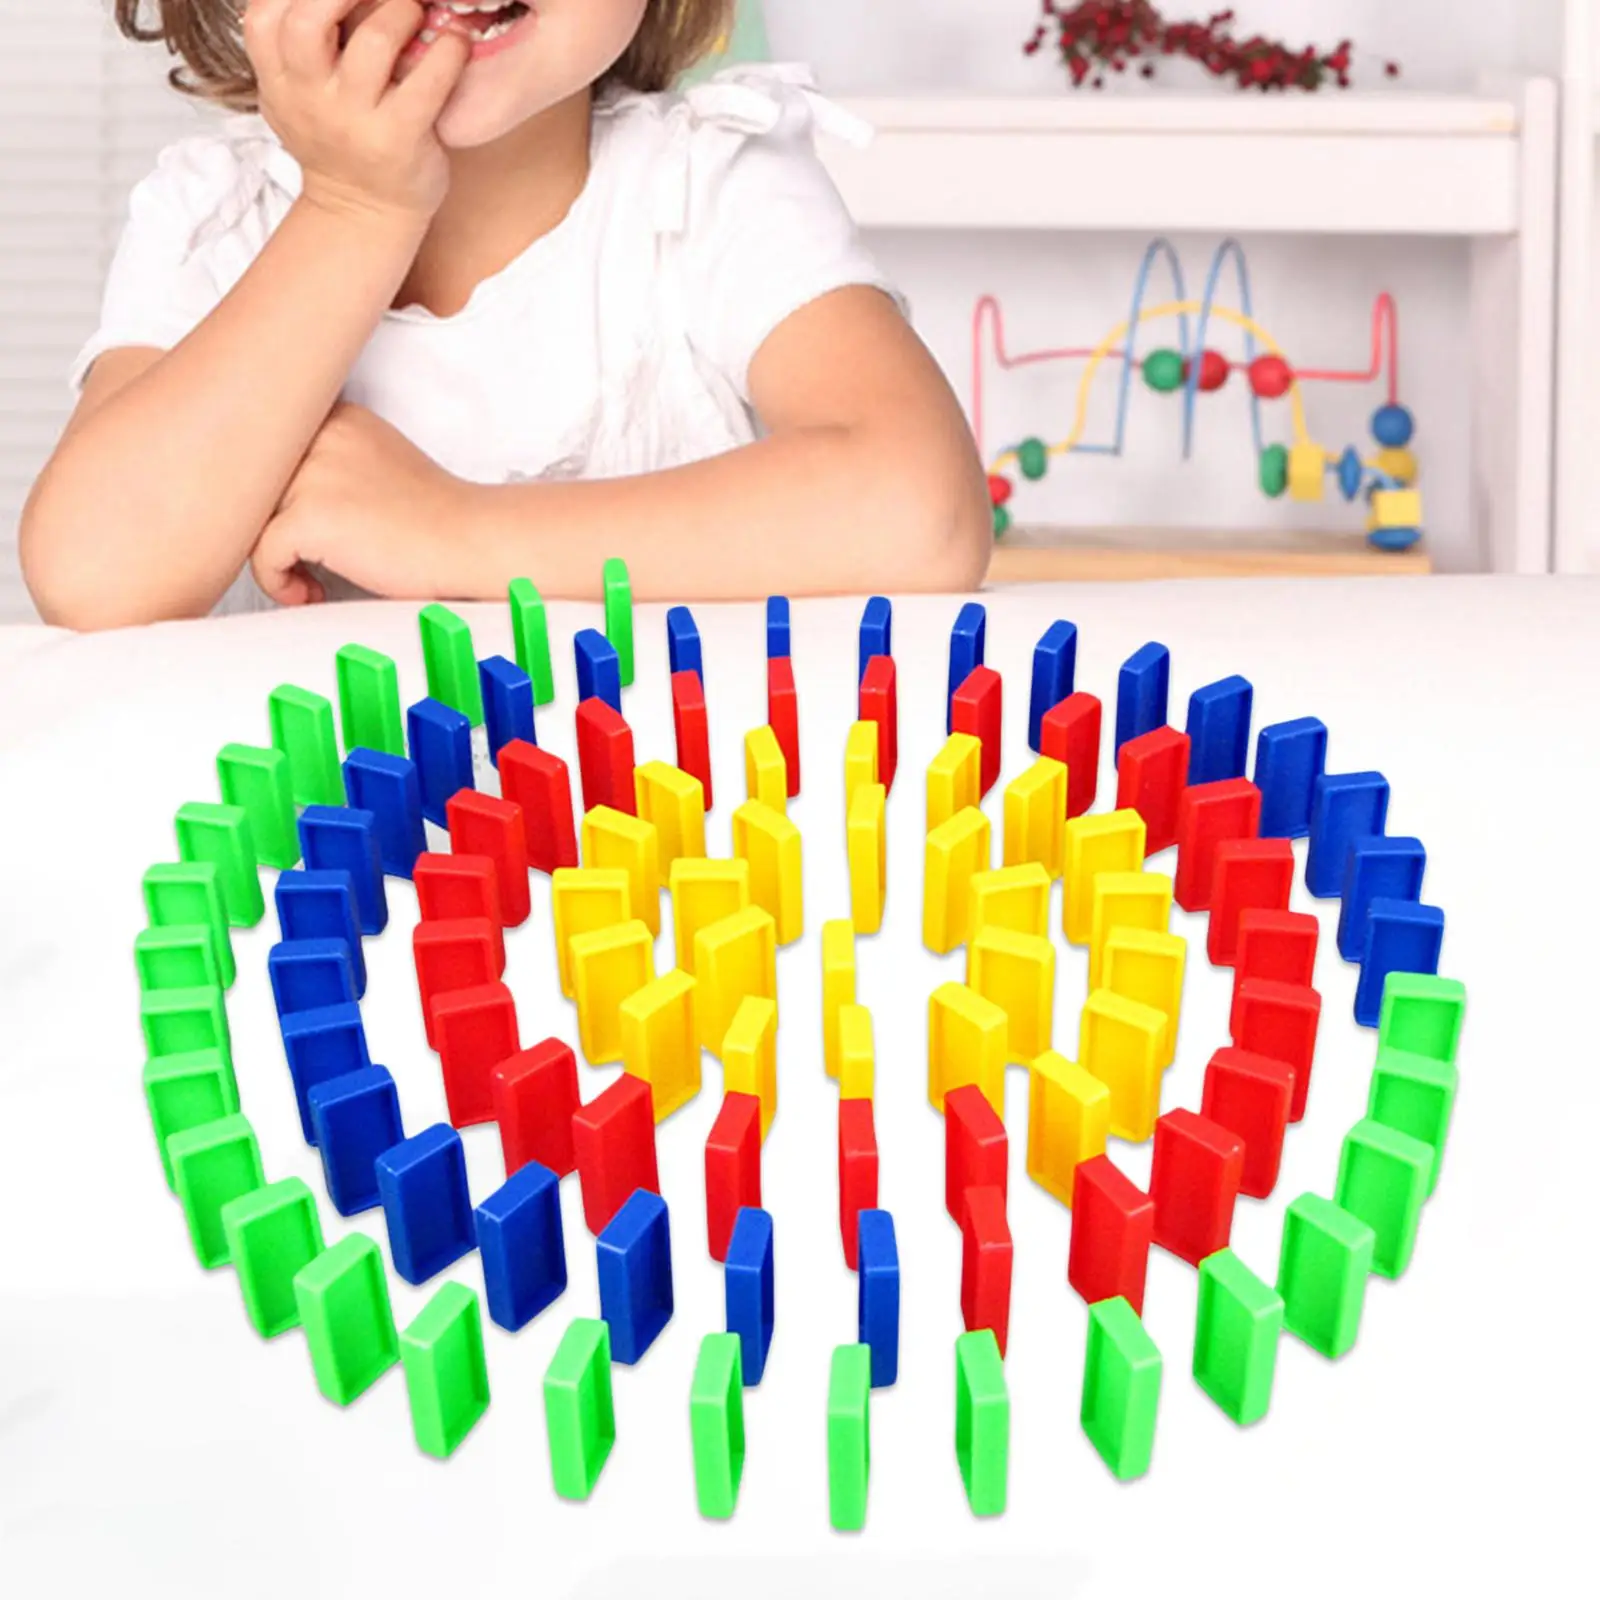 100x Colorful Dominoes Blocks Family Games Game Building Stacking Toy for Girls Boys Kids Children Birthday Gifts